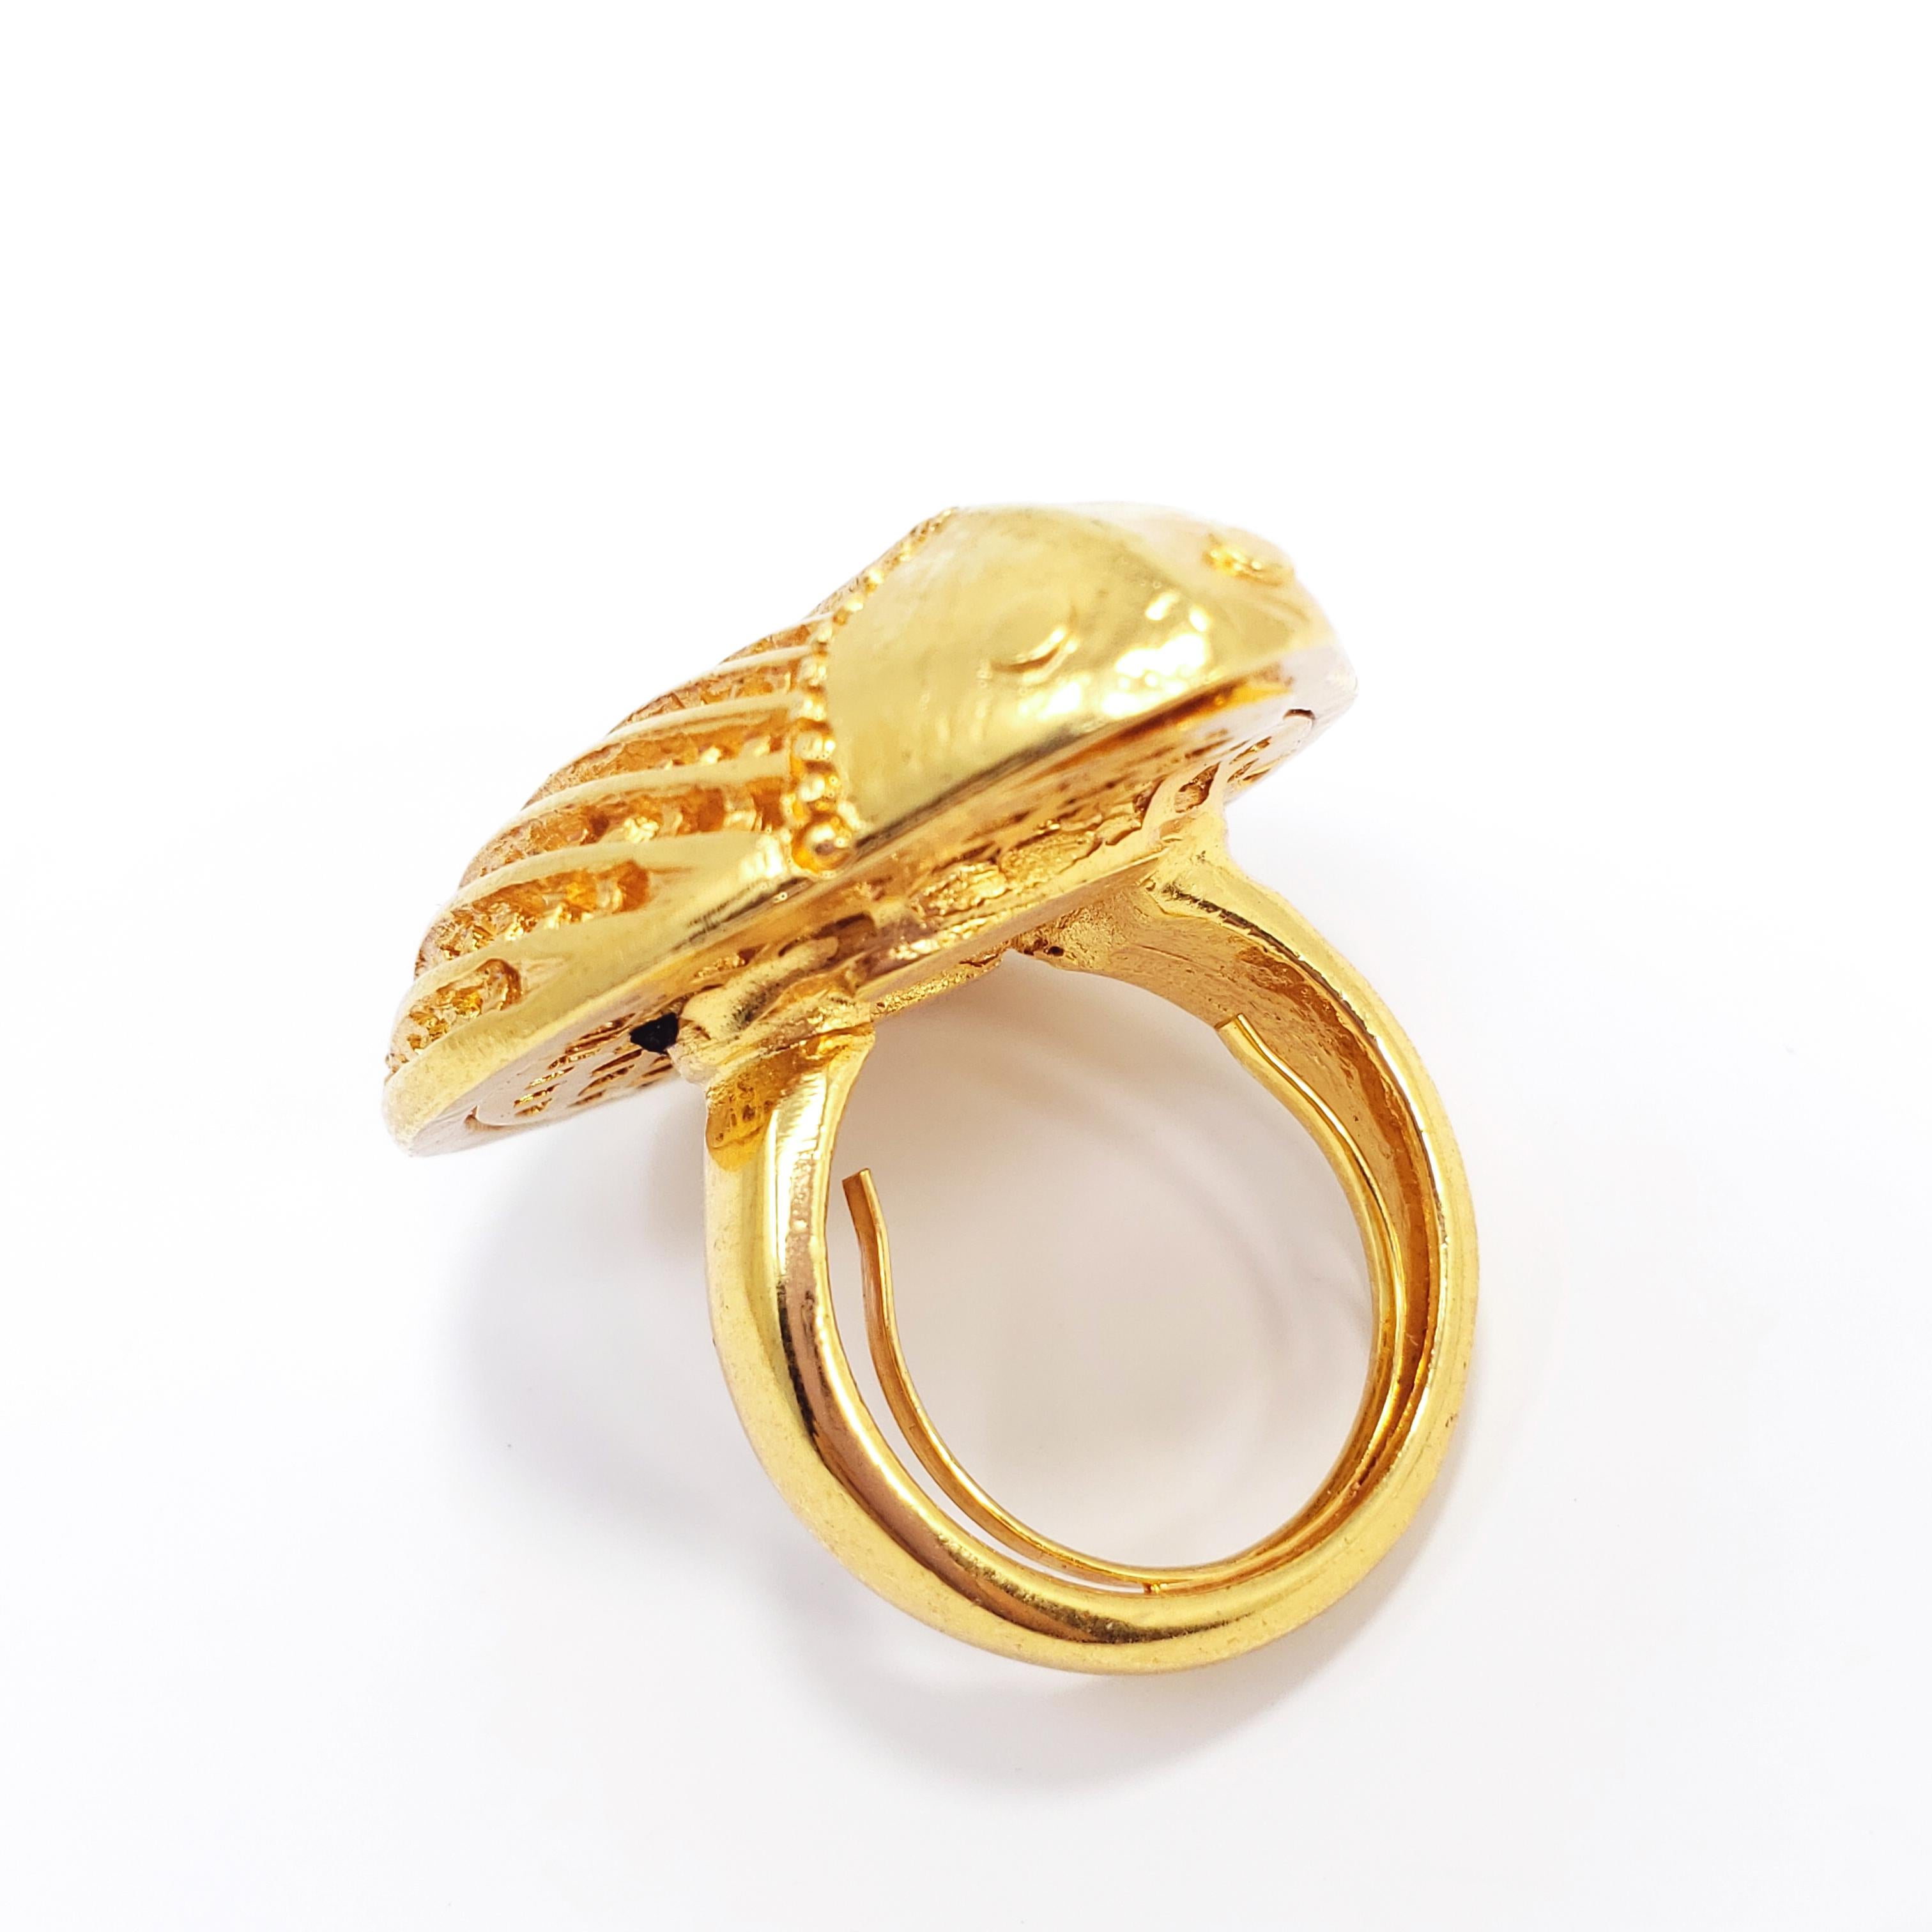 Oscar de la Renta Cocktail Gold Netted Scarab Ring, Adjustable In New Condition For Sale In Milford, DE